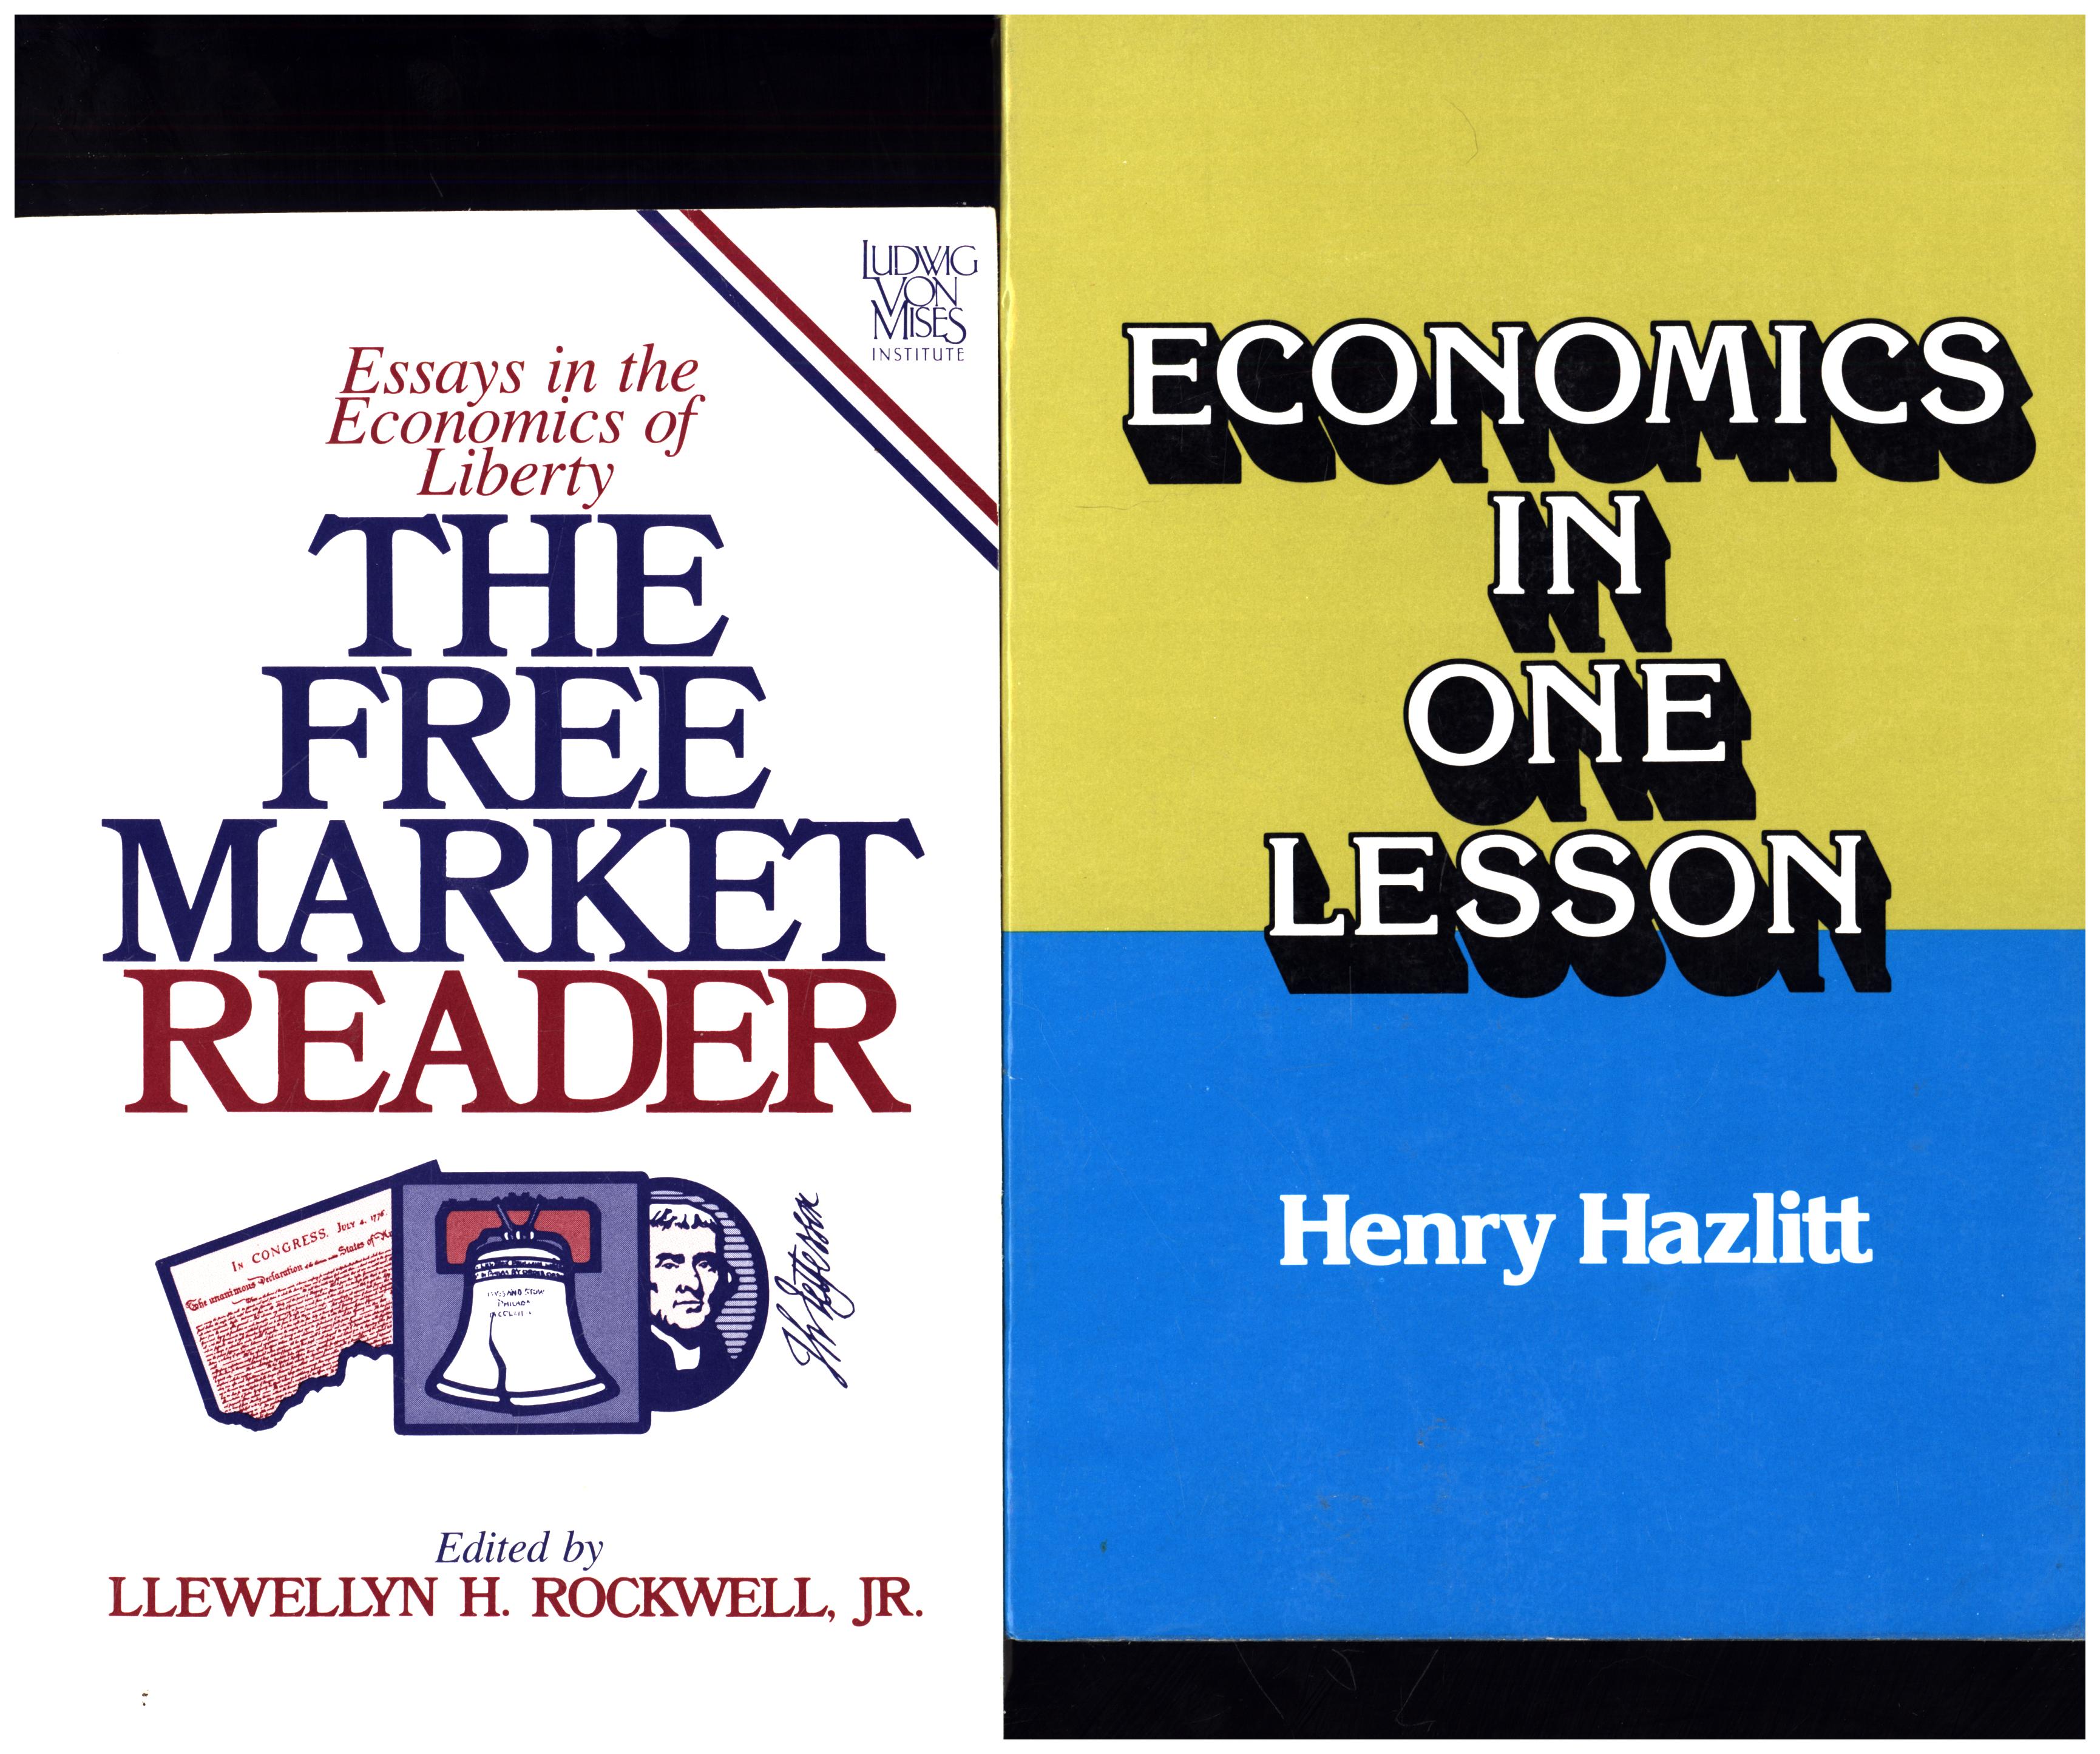 The Free Market Reader / Essays in the Economics of Liberty, AND A SECOND BOOK, Economics in One Lesson - Rockwell, Llewellyn H., Jr., AND A SECOND BOOK, by Henry Hazlitt